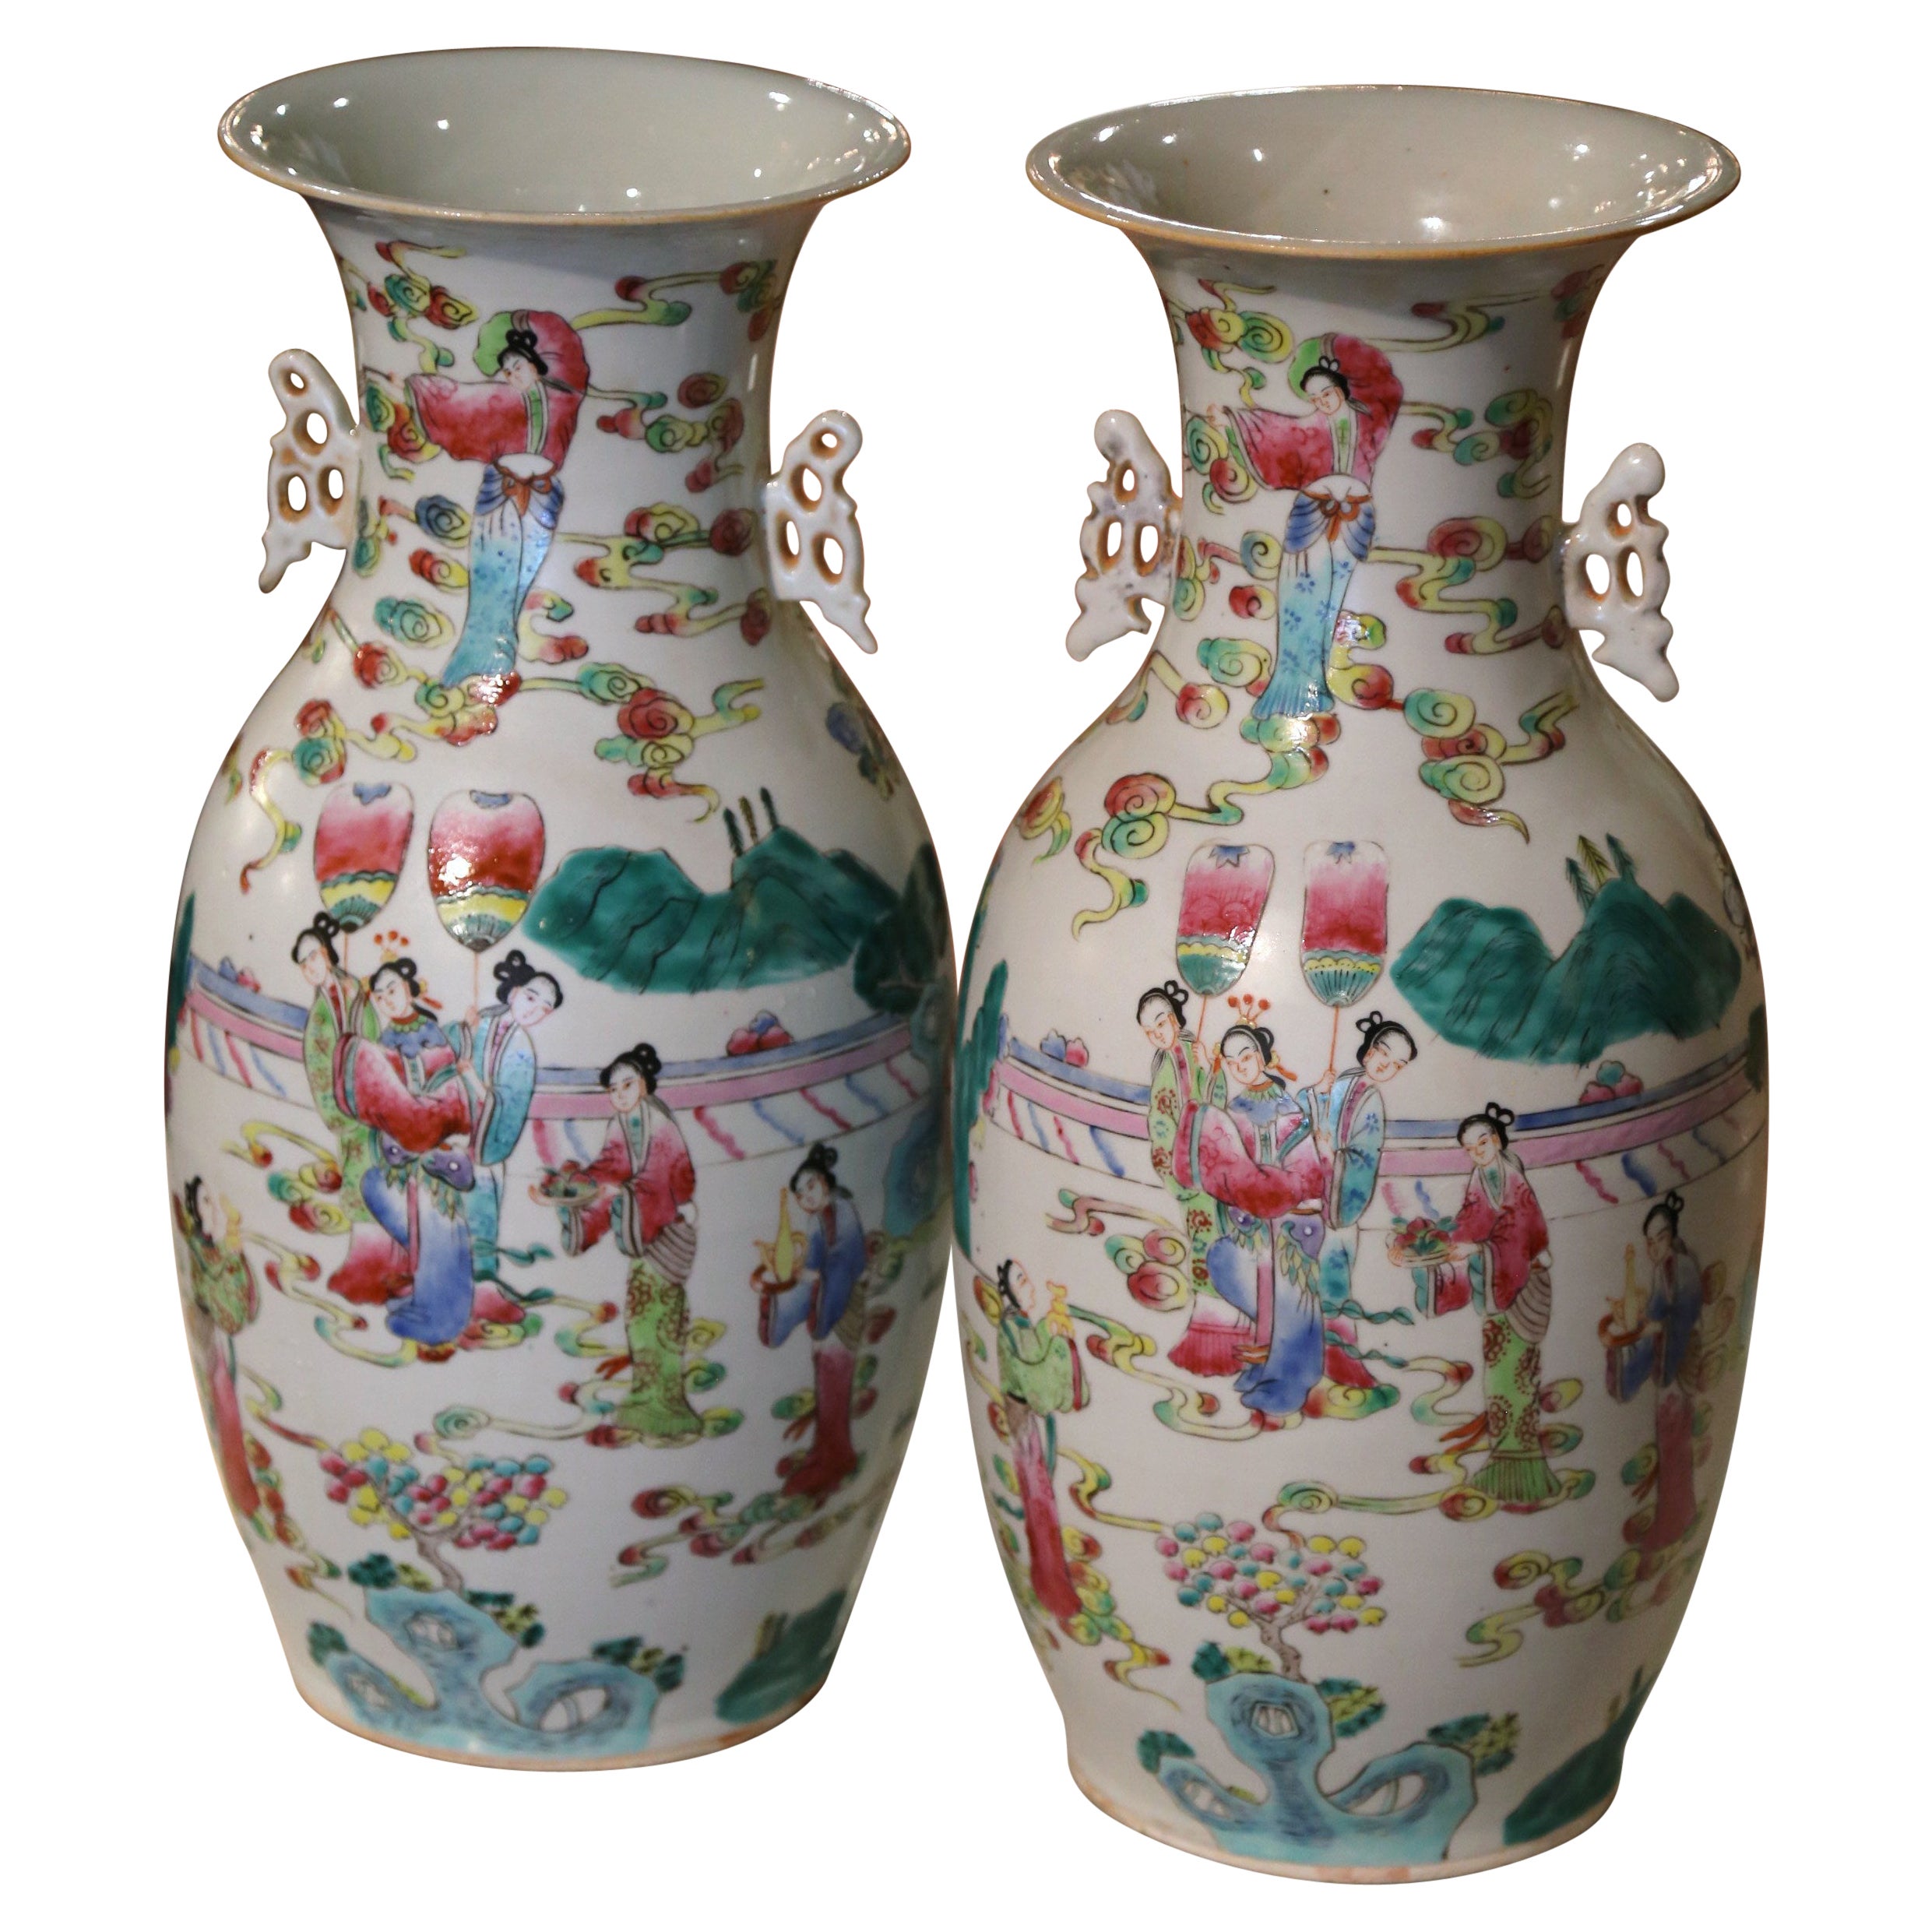 Pair of Mid-Century Chinese Polychrome Porcelain Vases